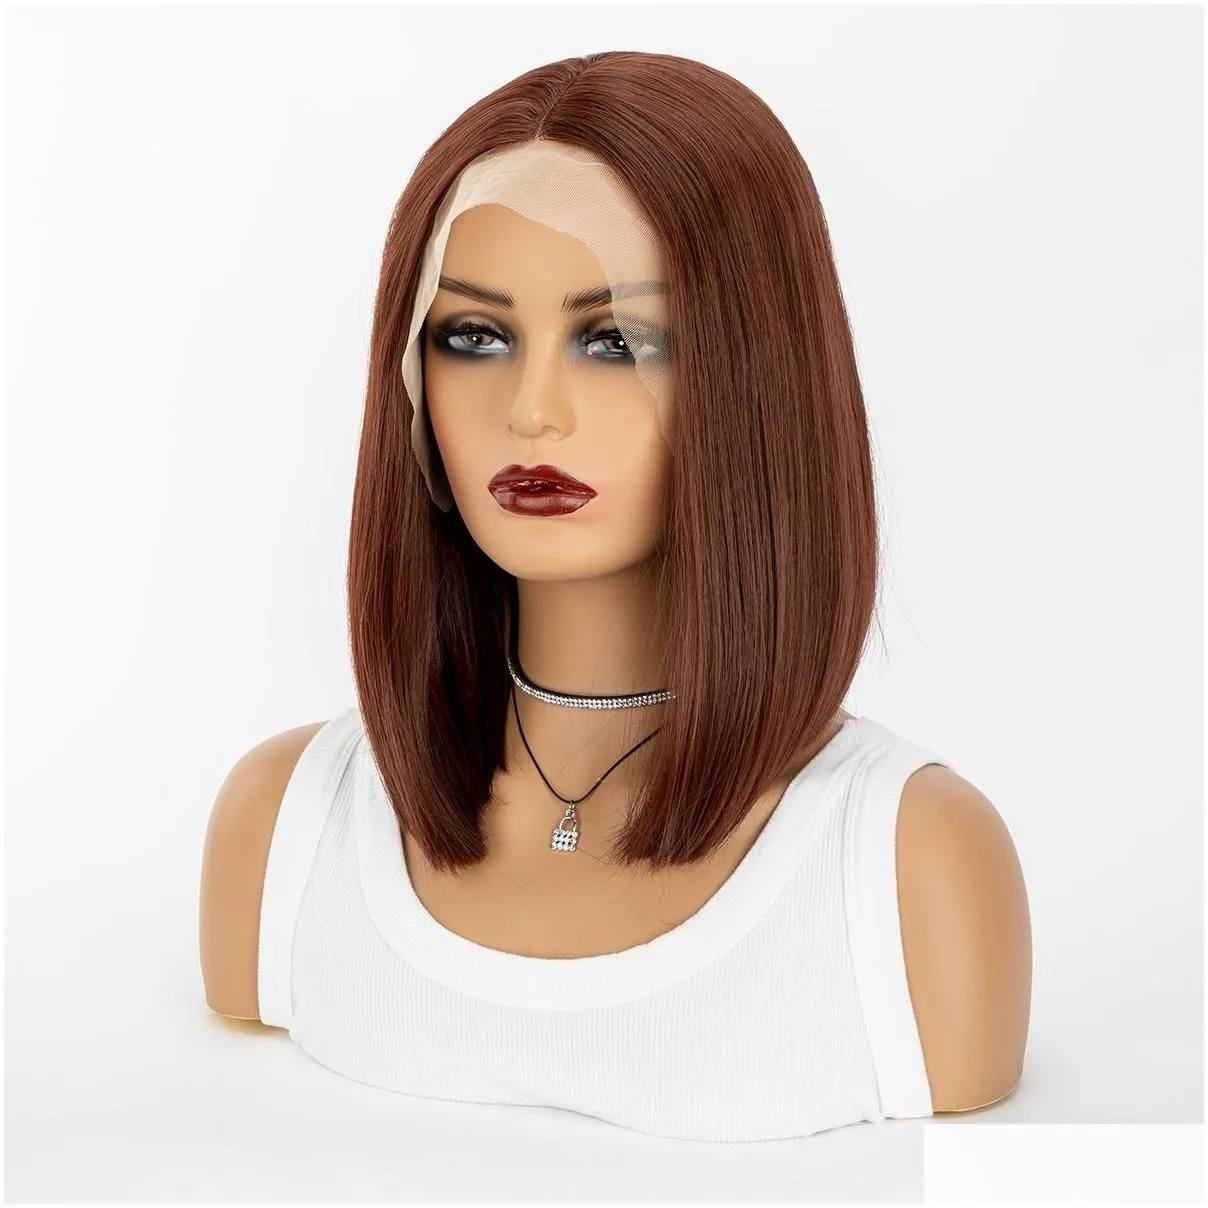 Lace Wigs Wig Woman Black Short Straight Hair Middle Divided Bobo Wave Head High Temperature Silk Chemical Fiber Front Hood Drop Del Dhxla